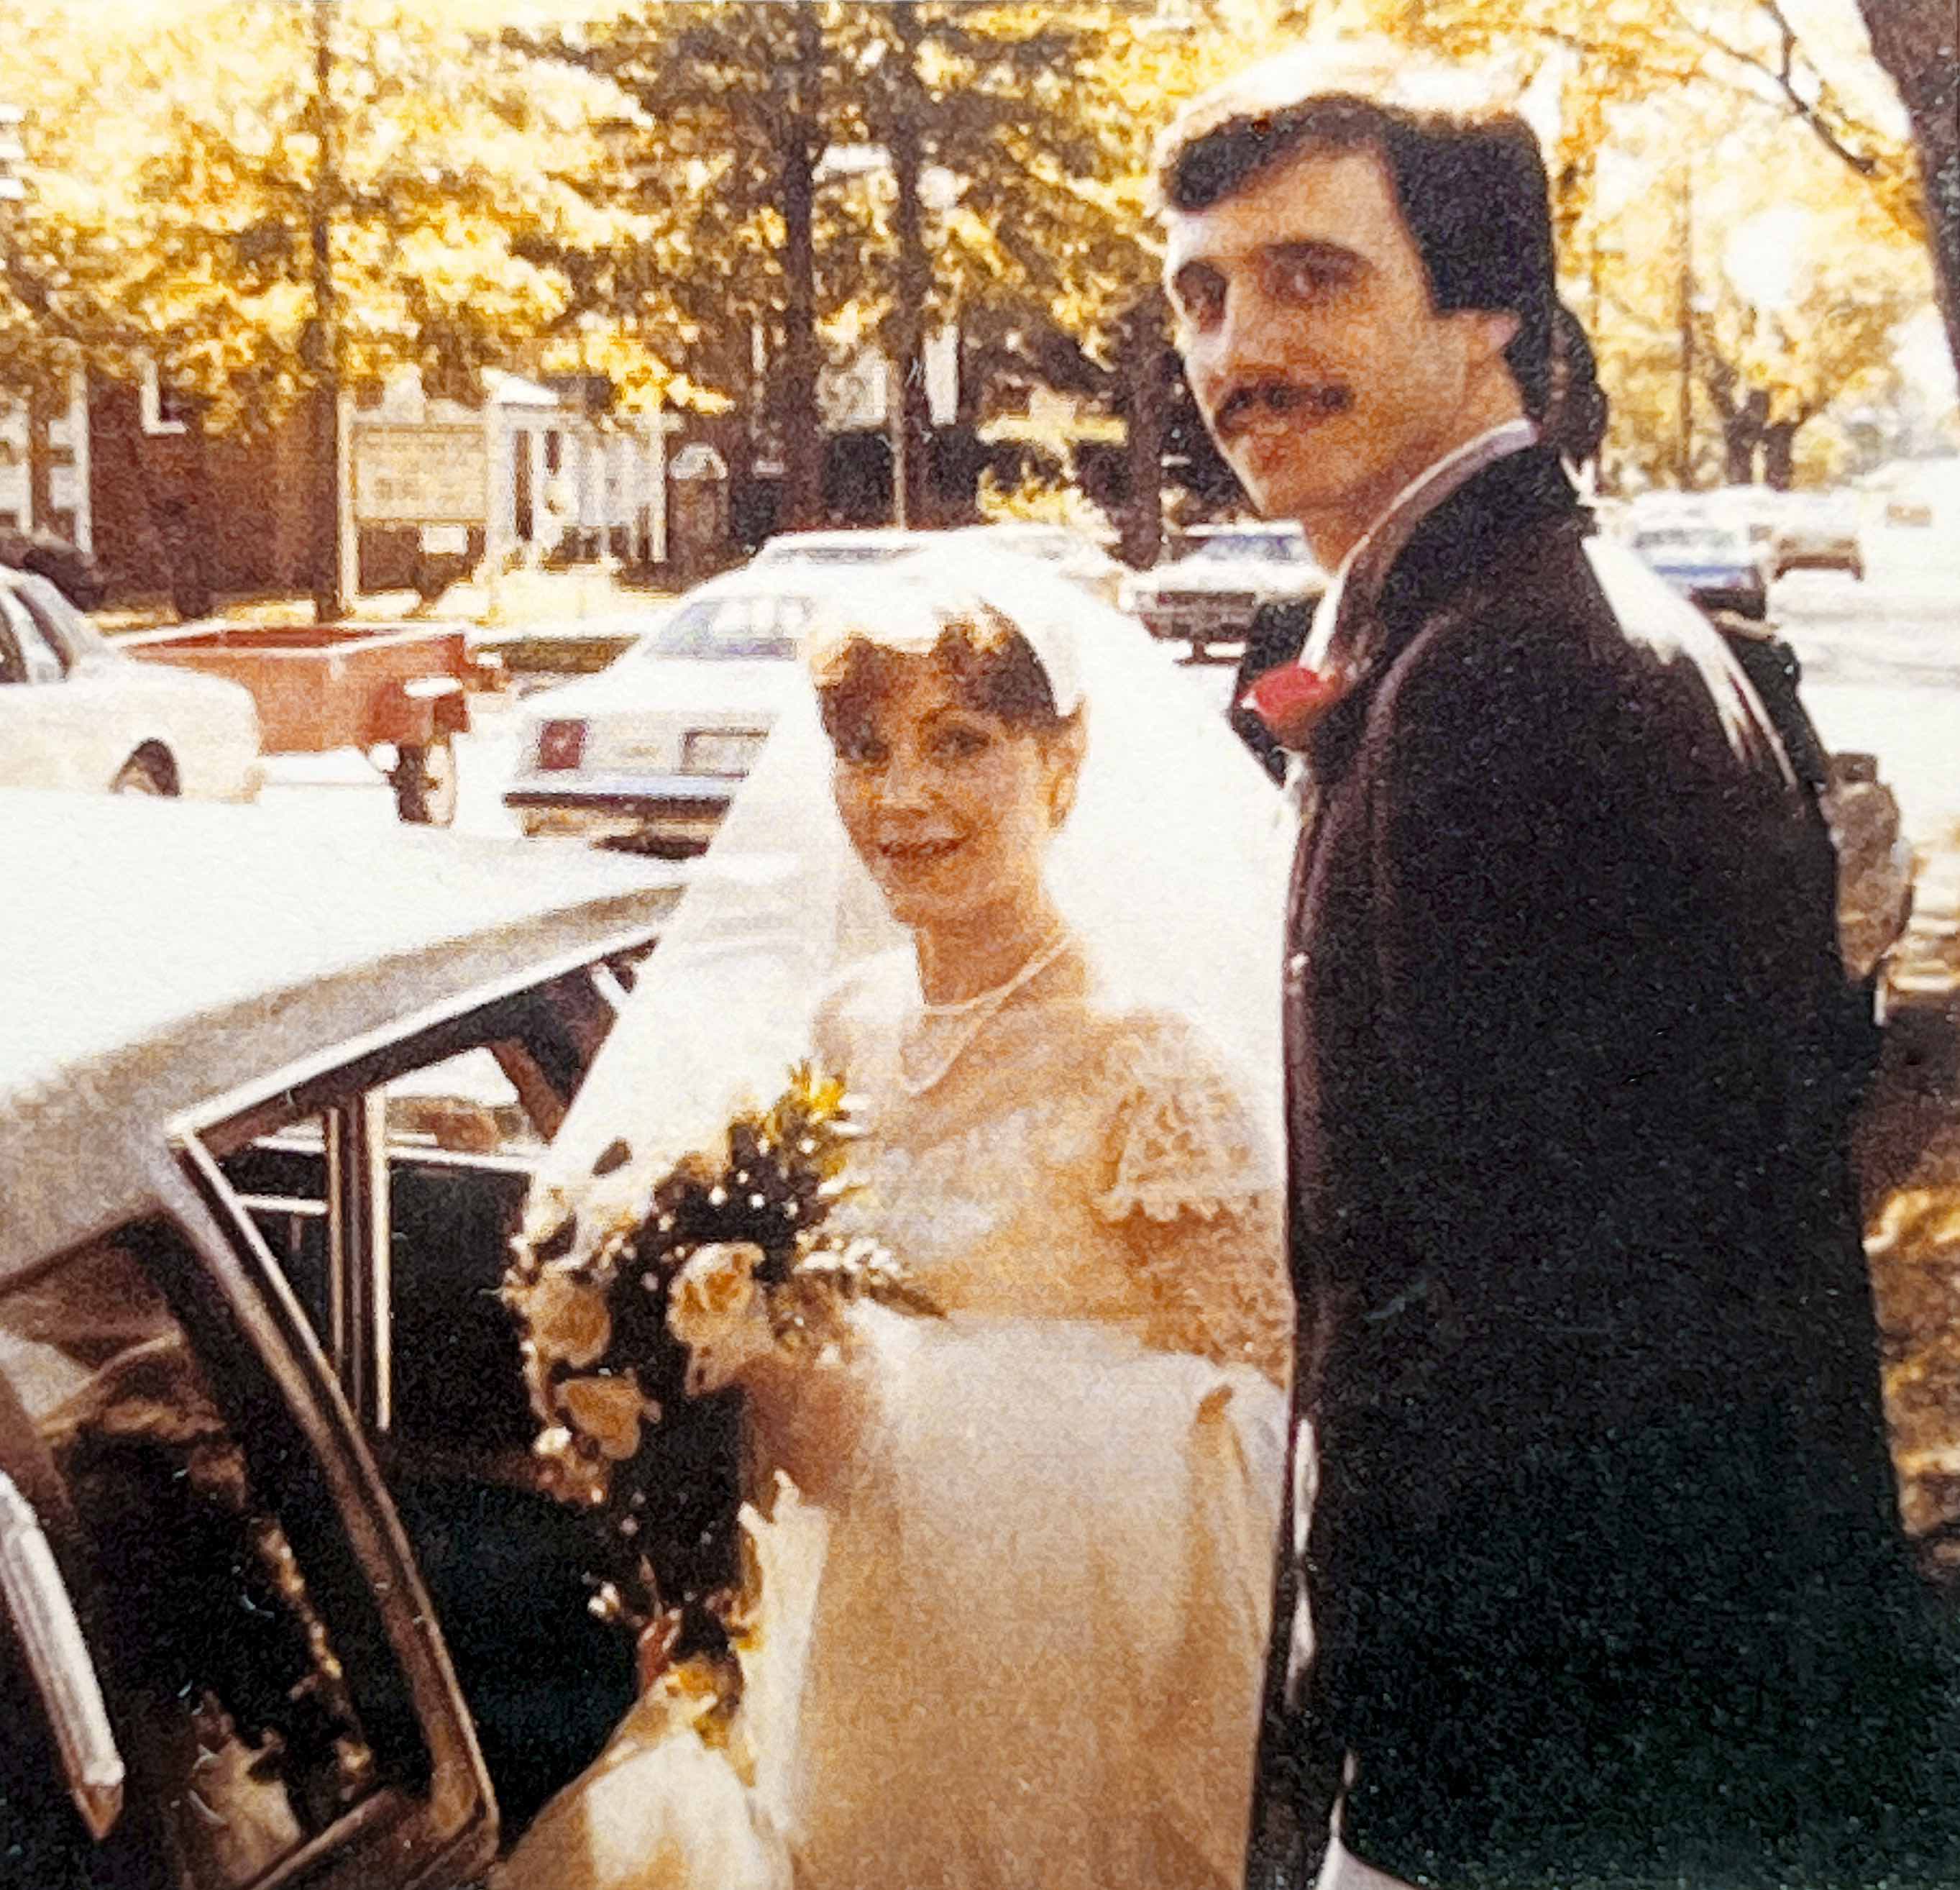 Robert and Virginia Severi on their wedding day in 1981.